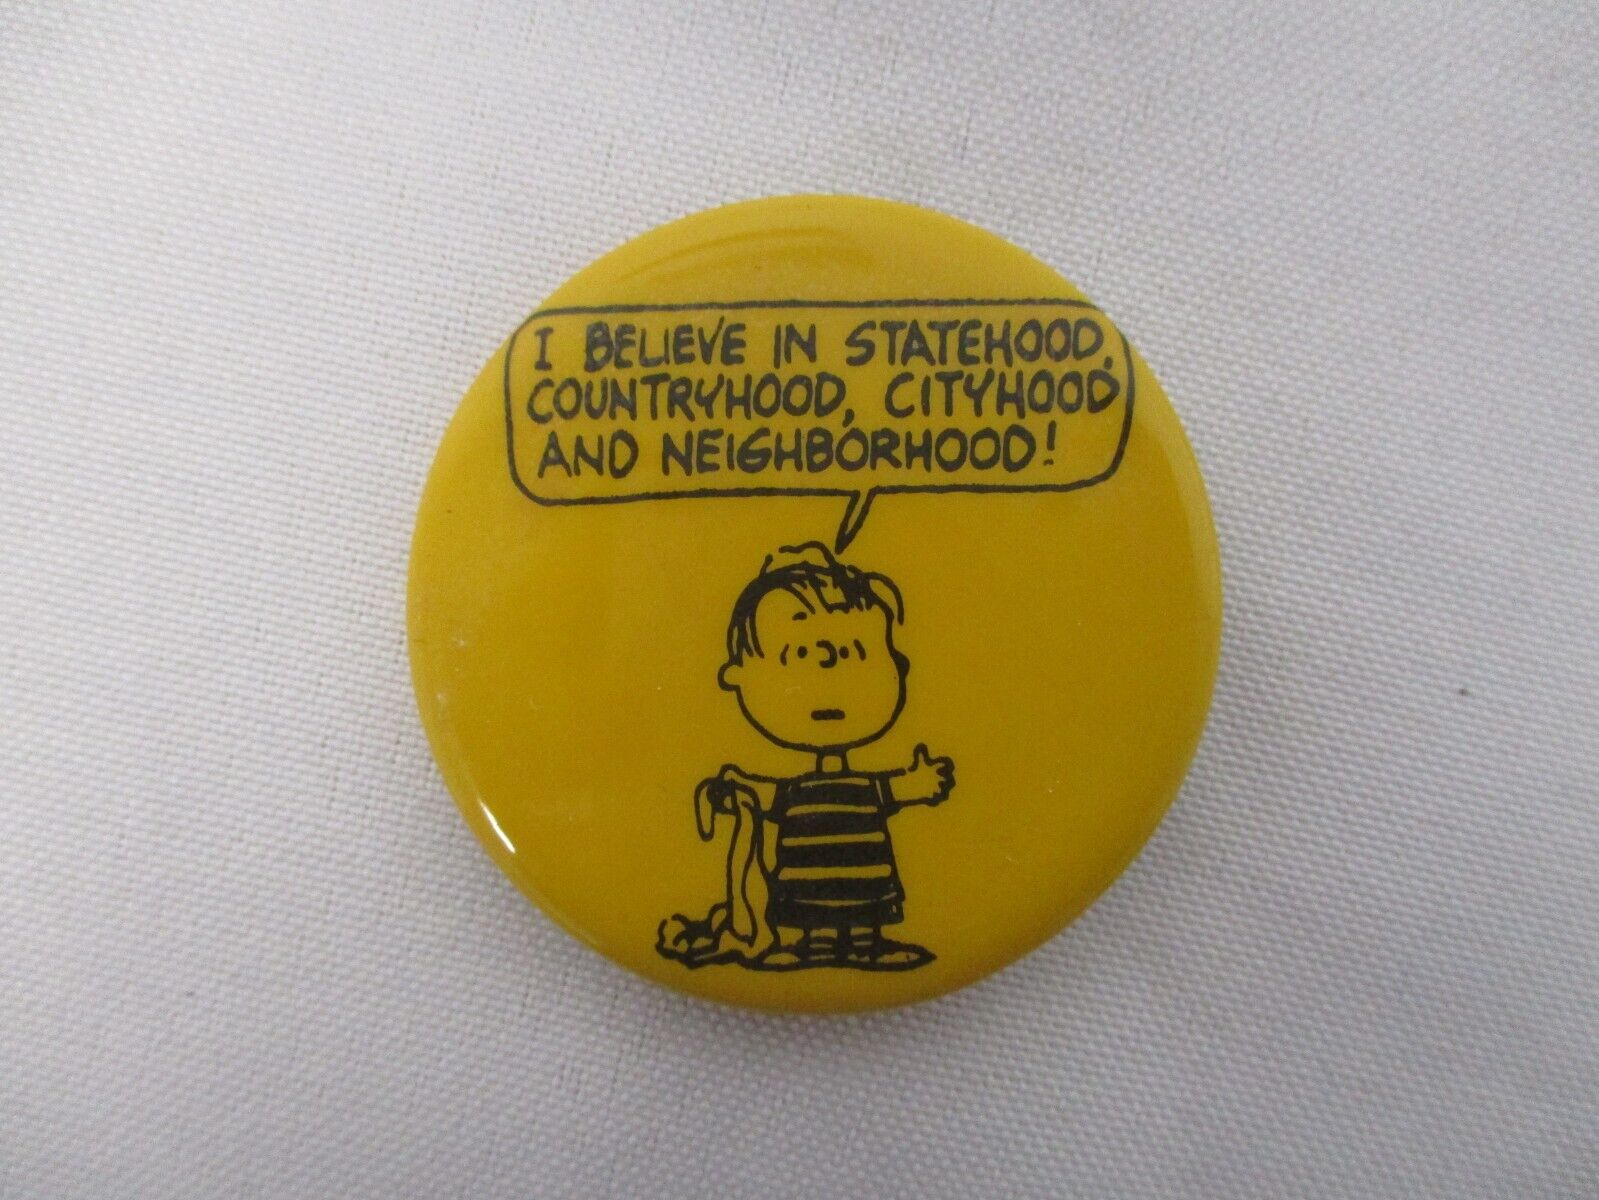 1964 UNITED FEATURES PEANUTS LINUS BUTTON 